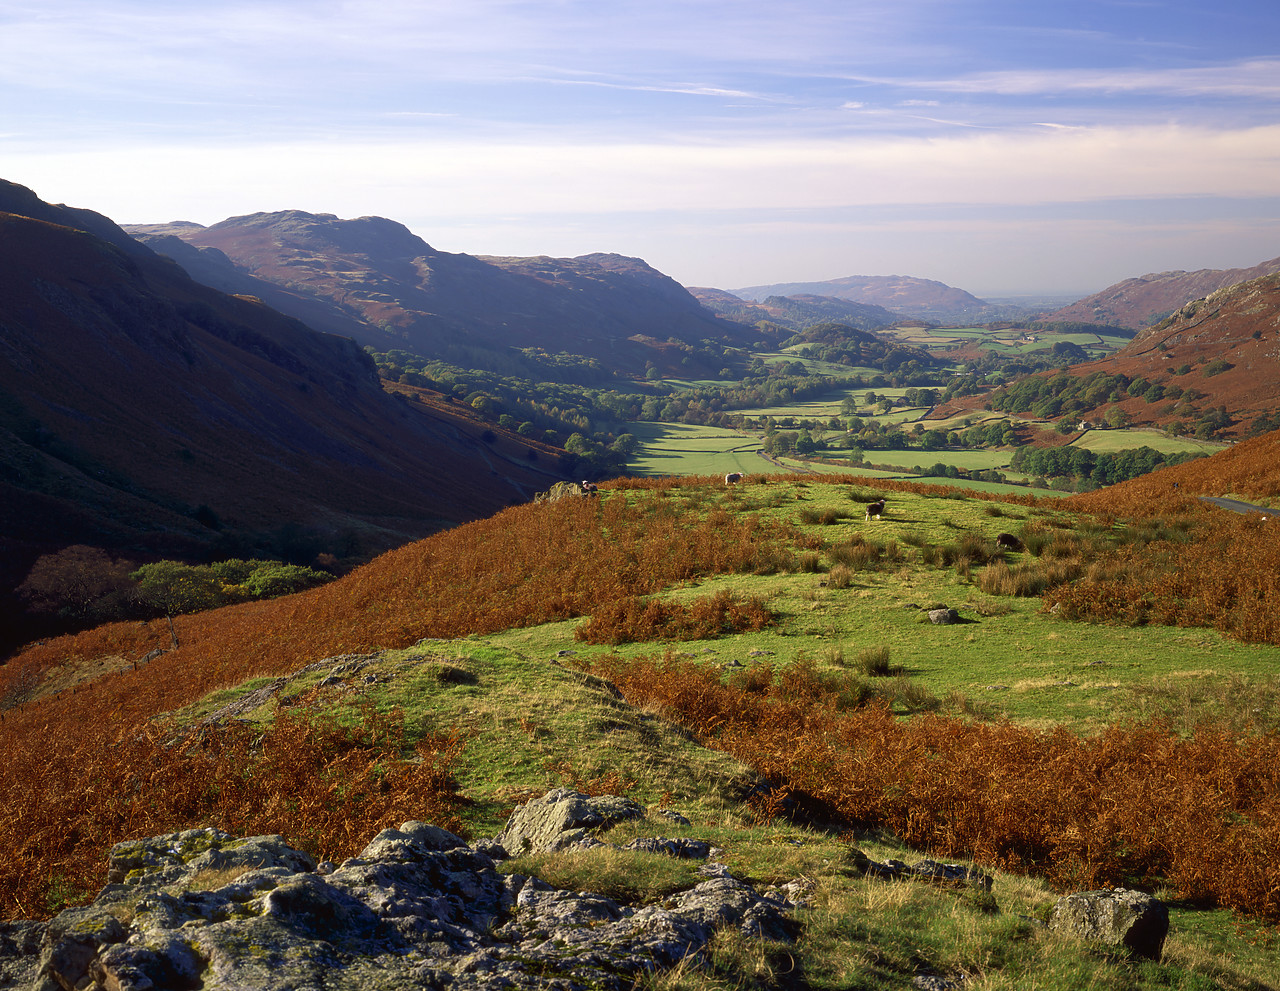 #970470-1 - View over Eskdale, Lake District National Park, Cumbria, England